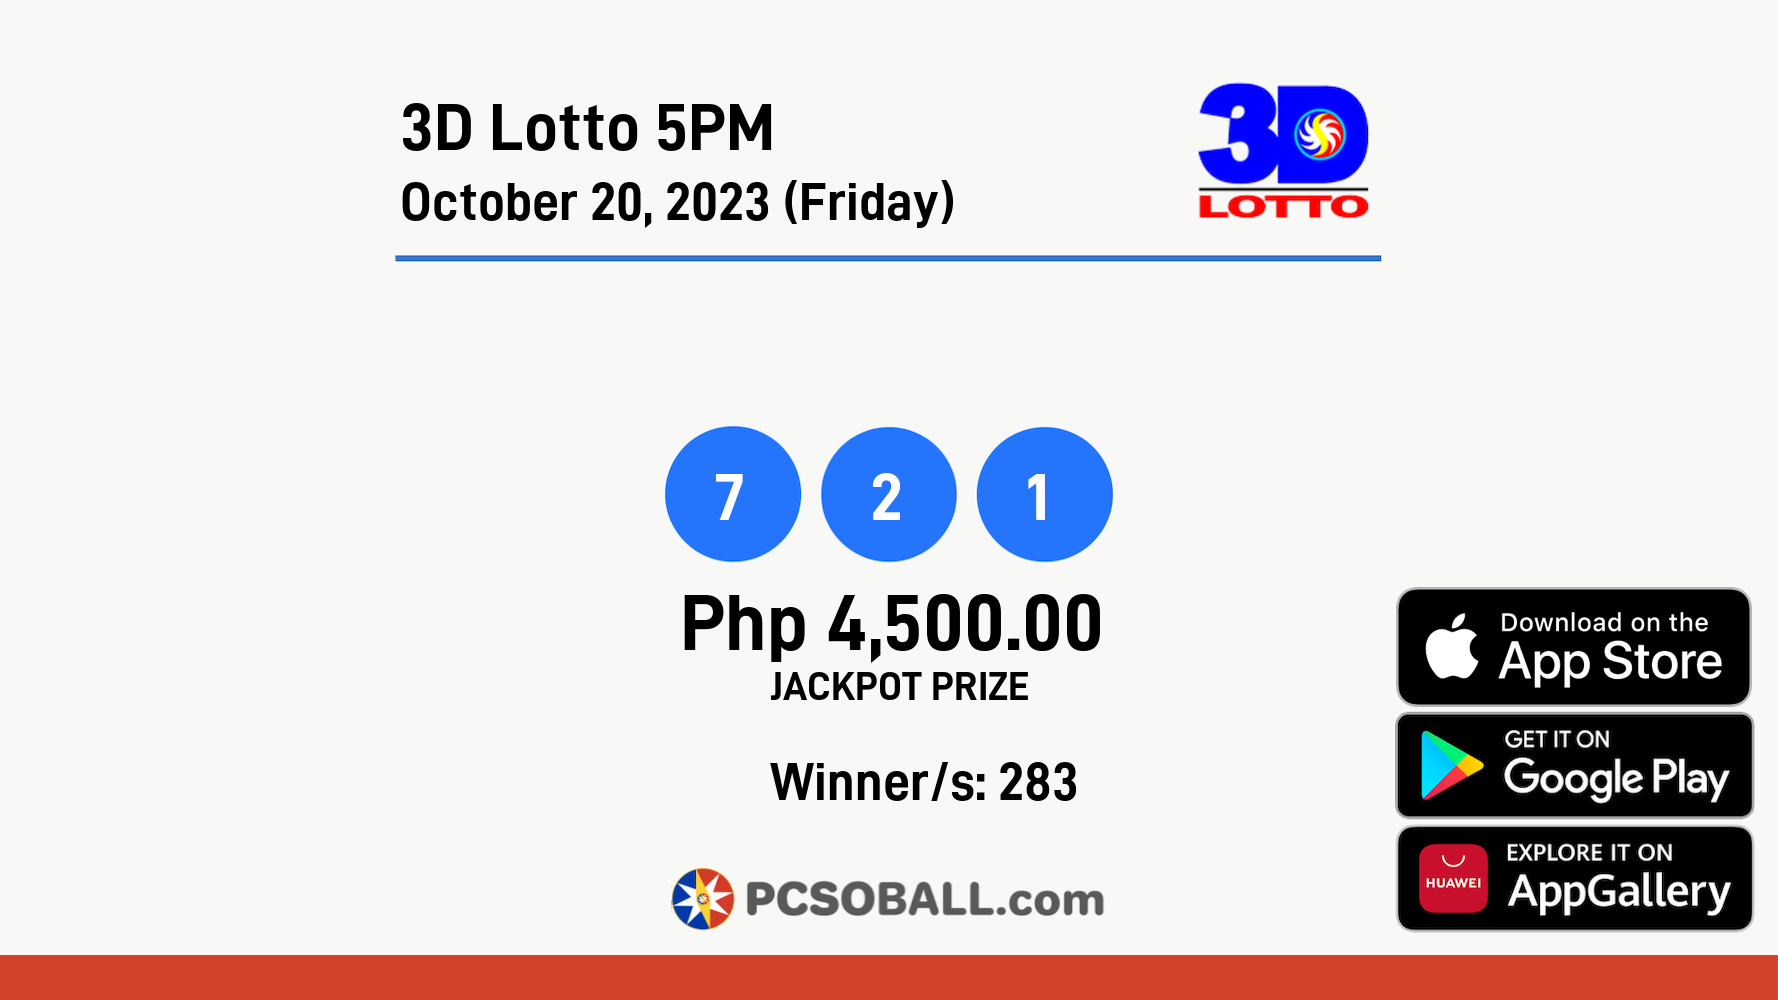 3D Lotto 5PM October 20, 2023 (Friday) Result